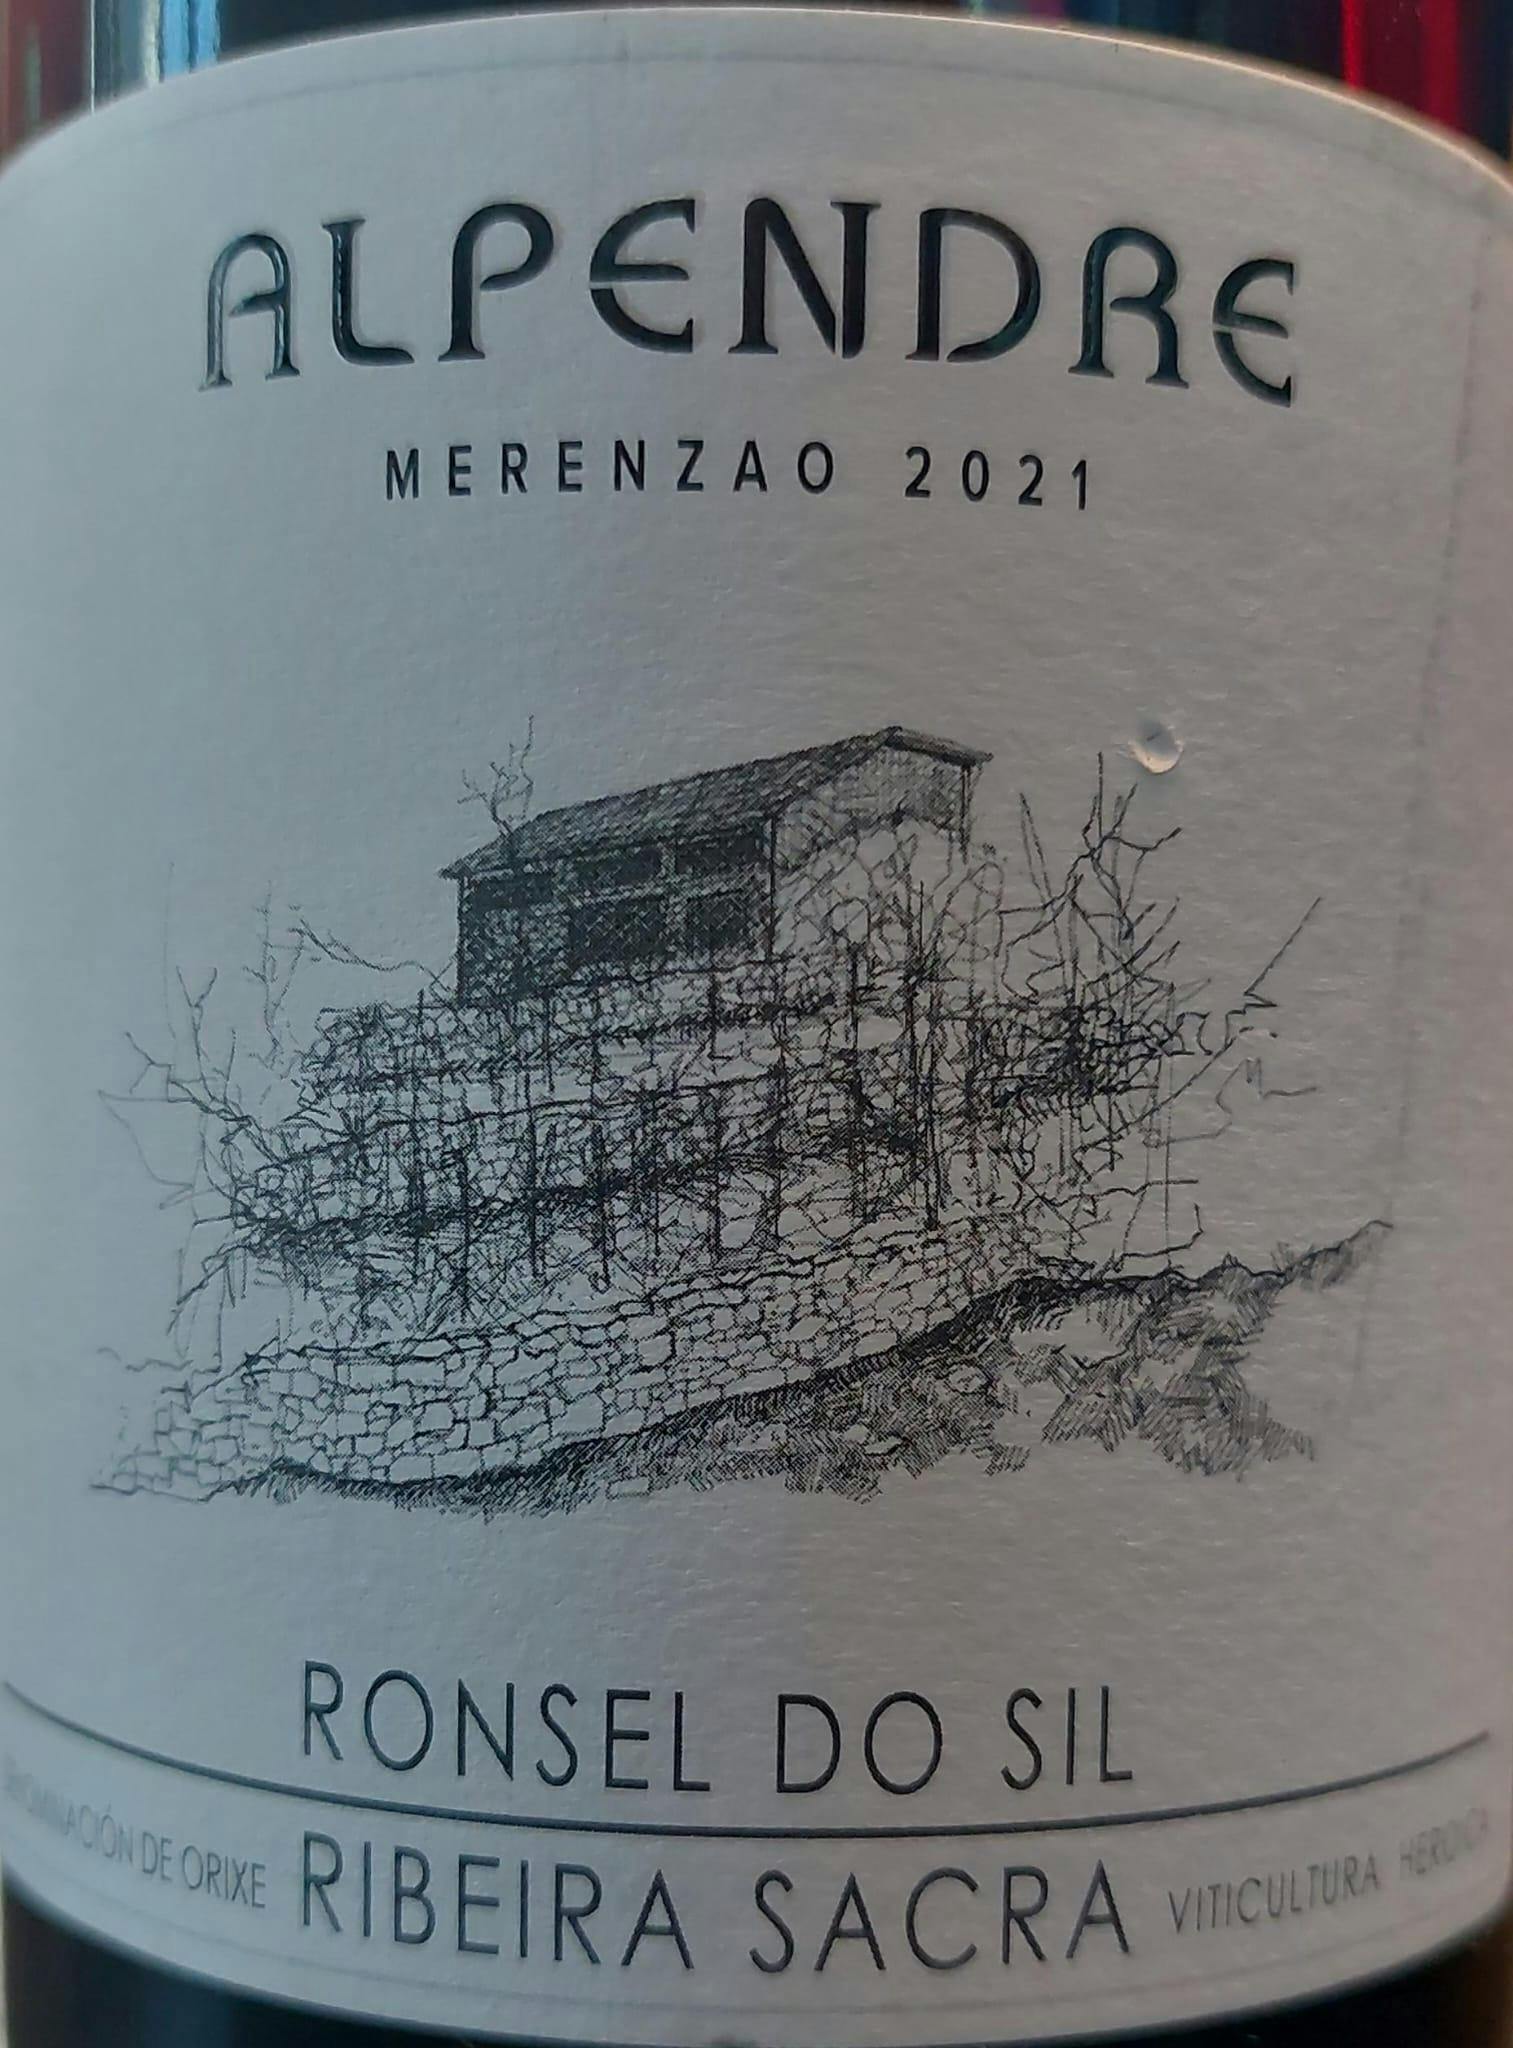 Alpendre Merenzao 2021 | Ronsel do Sil